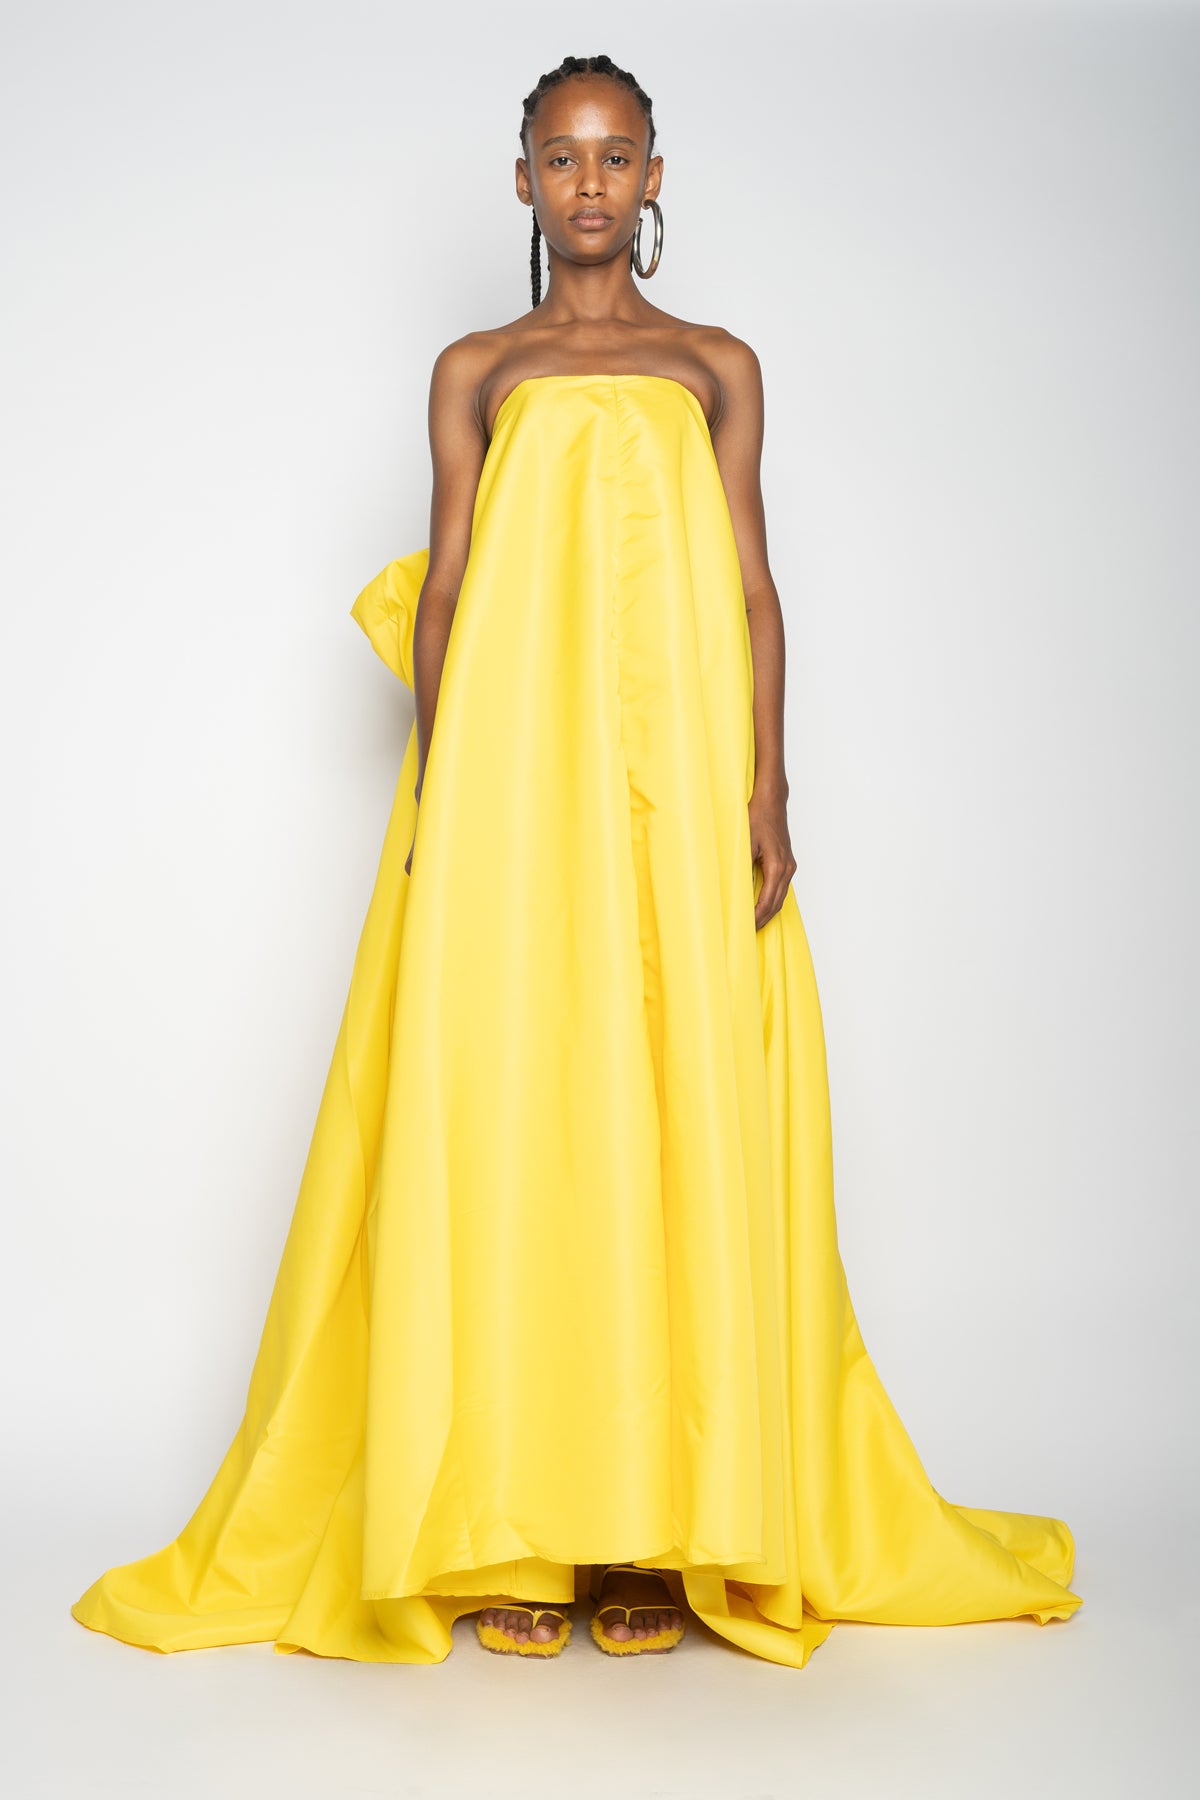 YELLOW DRESS WITH GIANT BOW IN THE BACK marques almeida